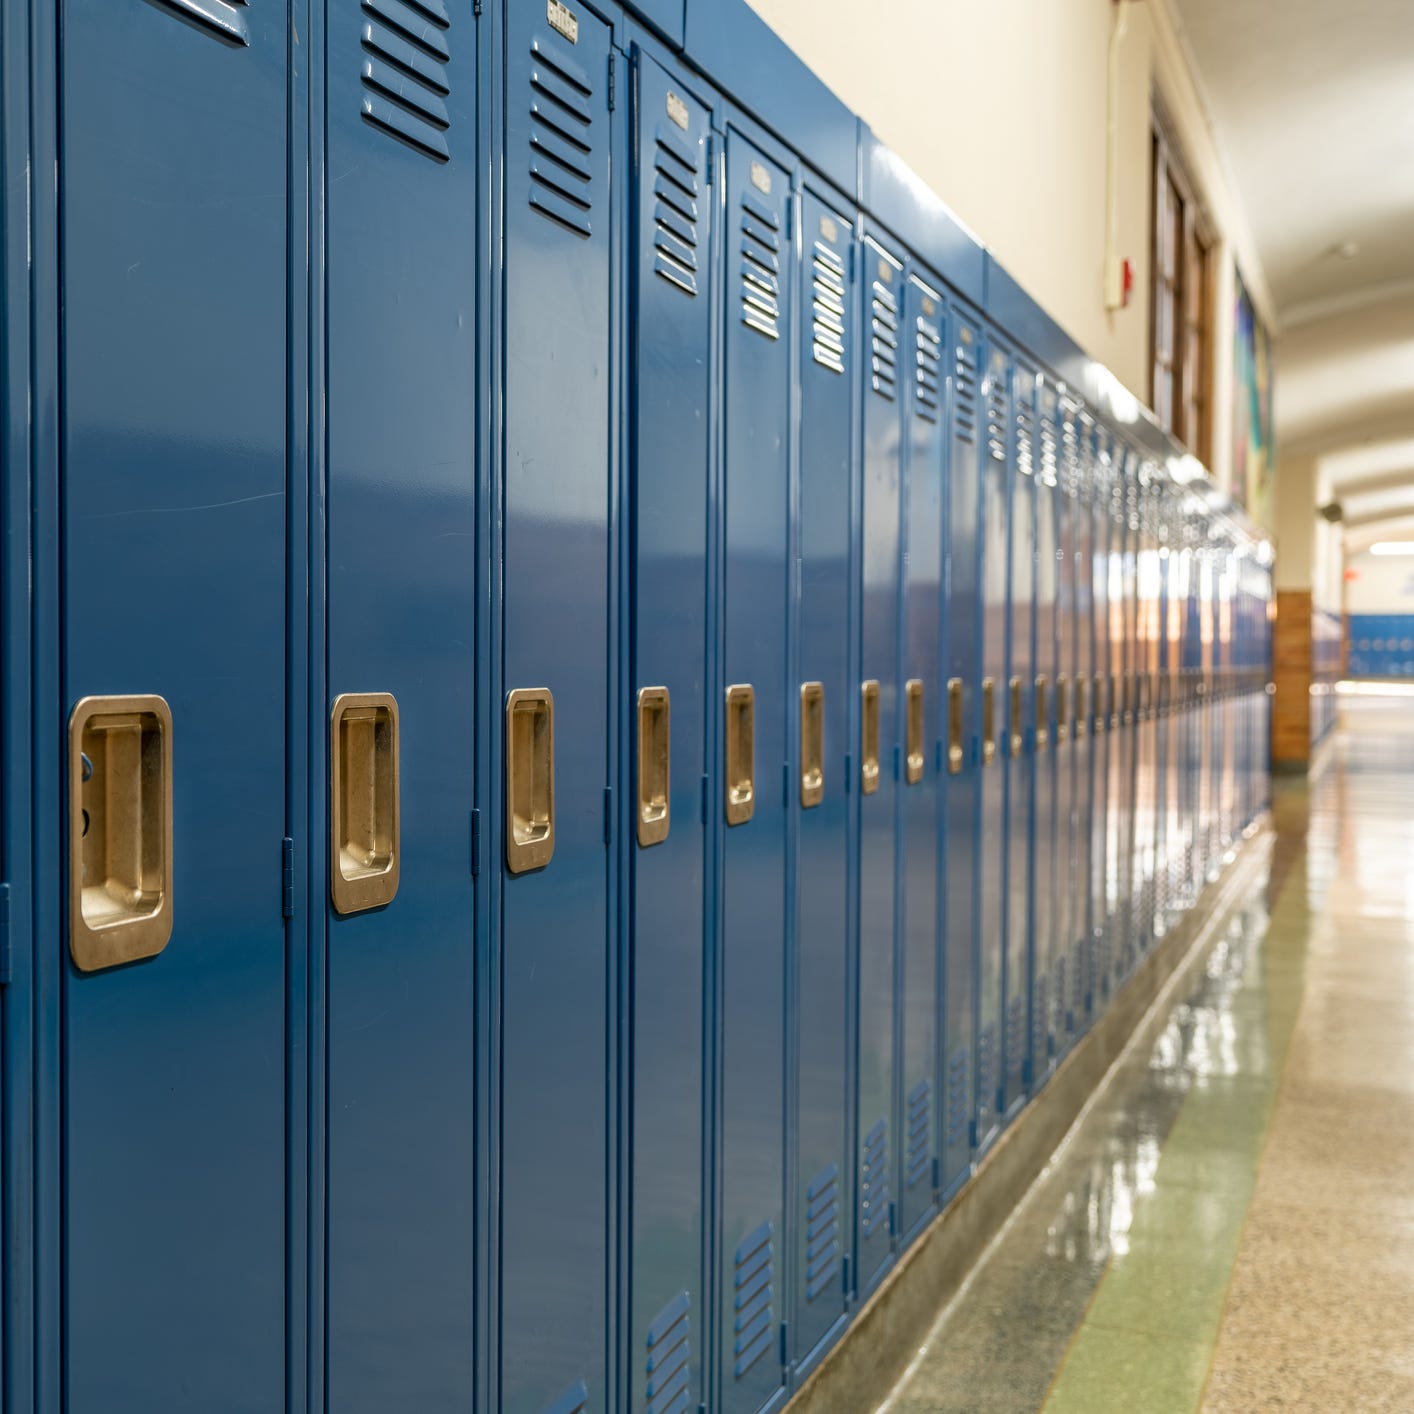 Photo of a blue metal lockers along a nondescript hallway in a typical US High School. No identifiable information included and nobody in the hall.